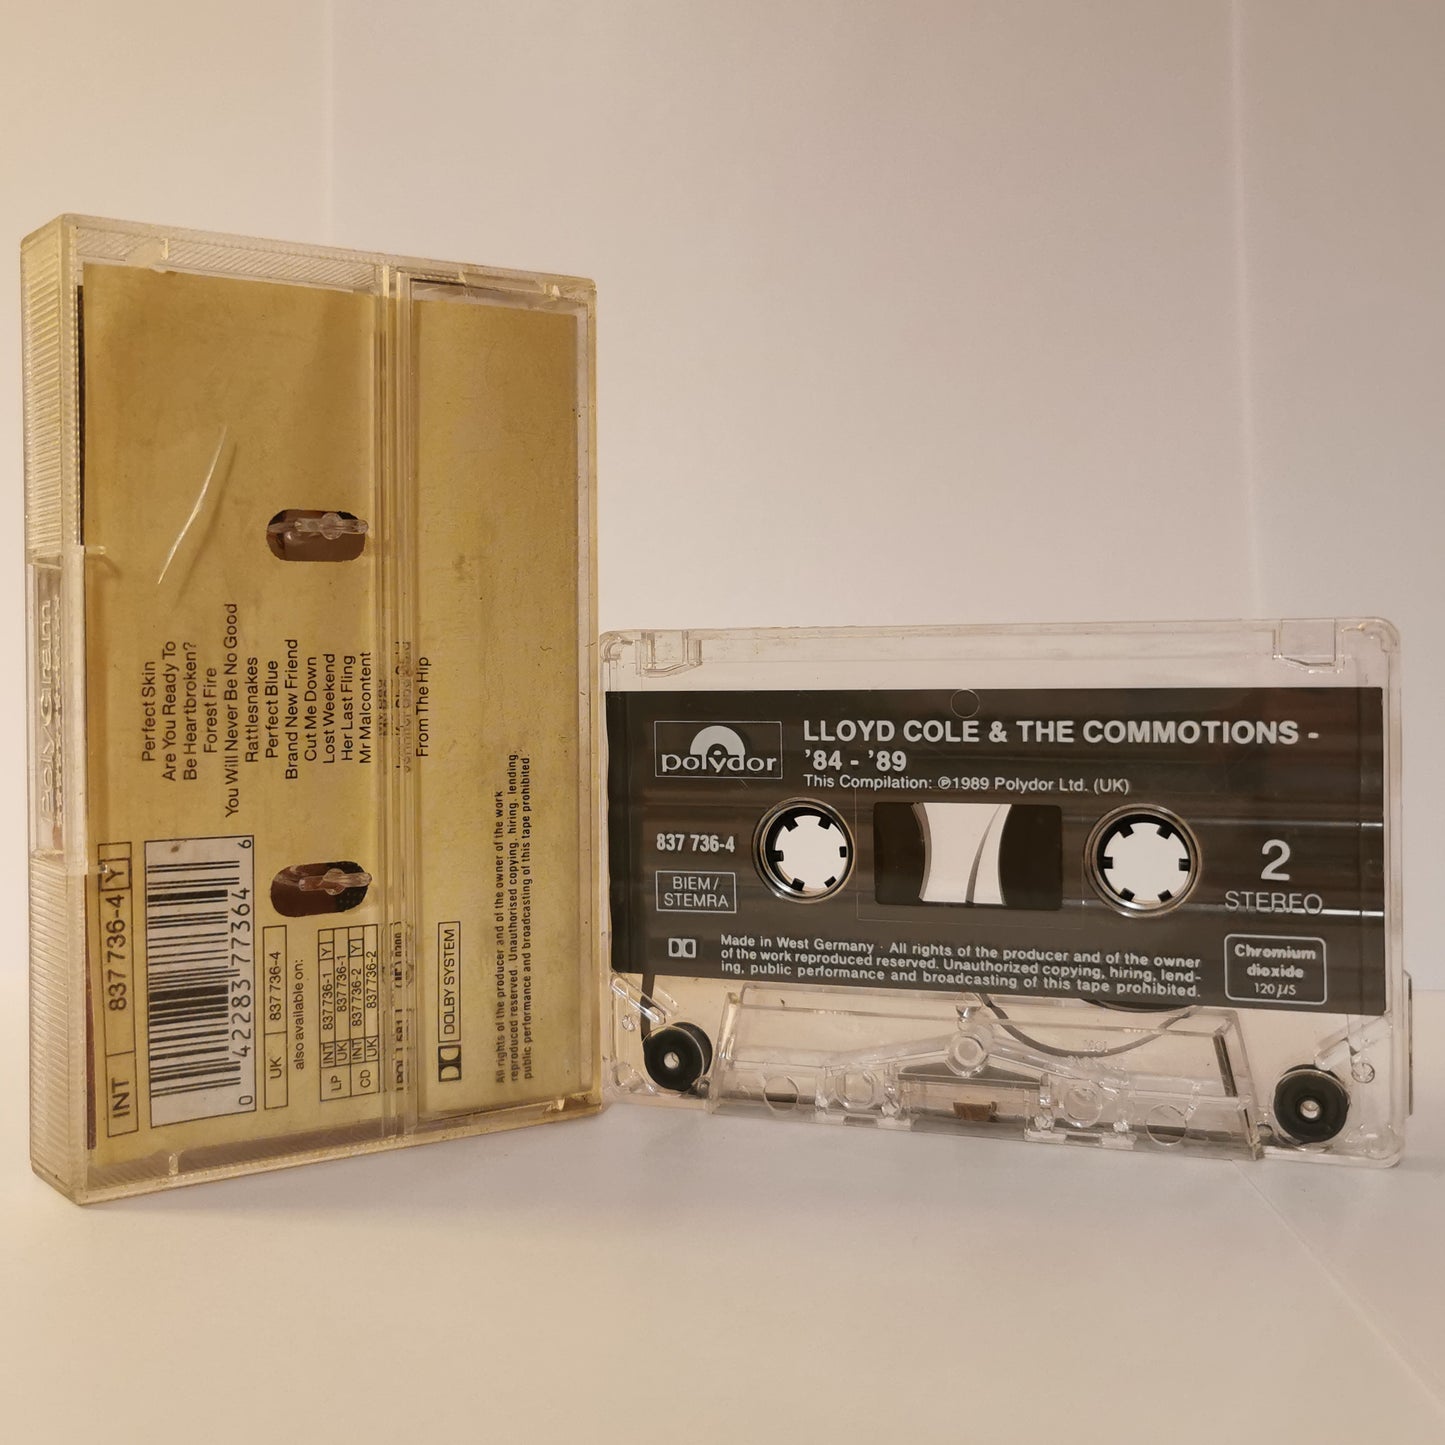 LLOYD COLE AND THE COMMOTIONS - 1984 1989